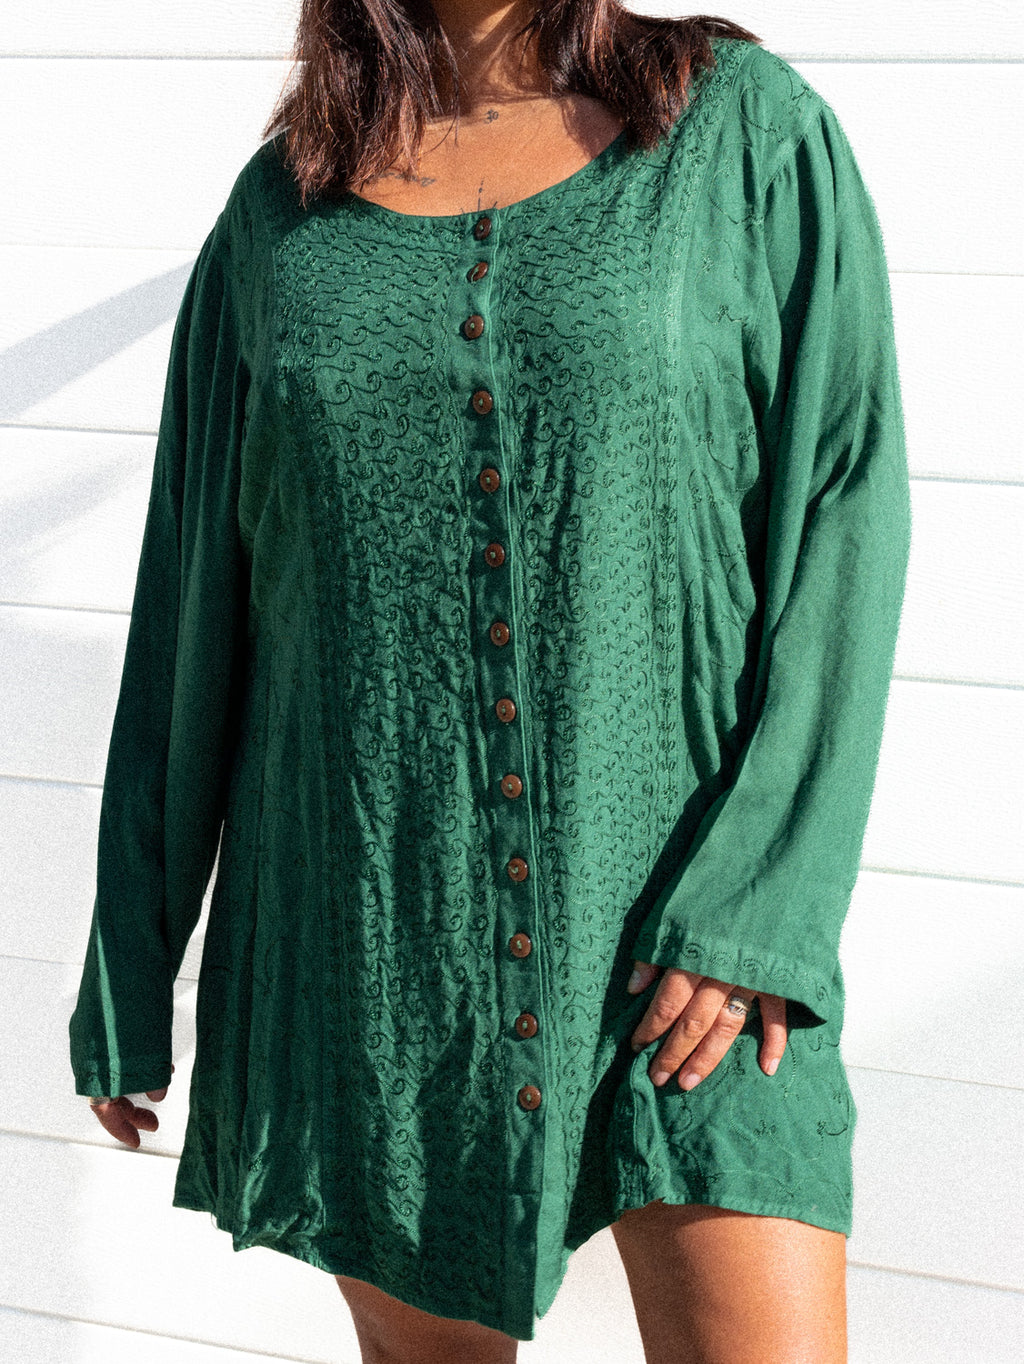 VTG GREEN EMBROIDERED LONG SLEEVE LOOSE DRESS / L - XL